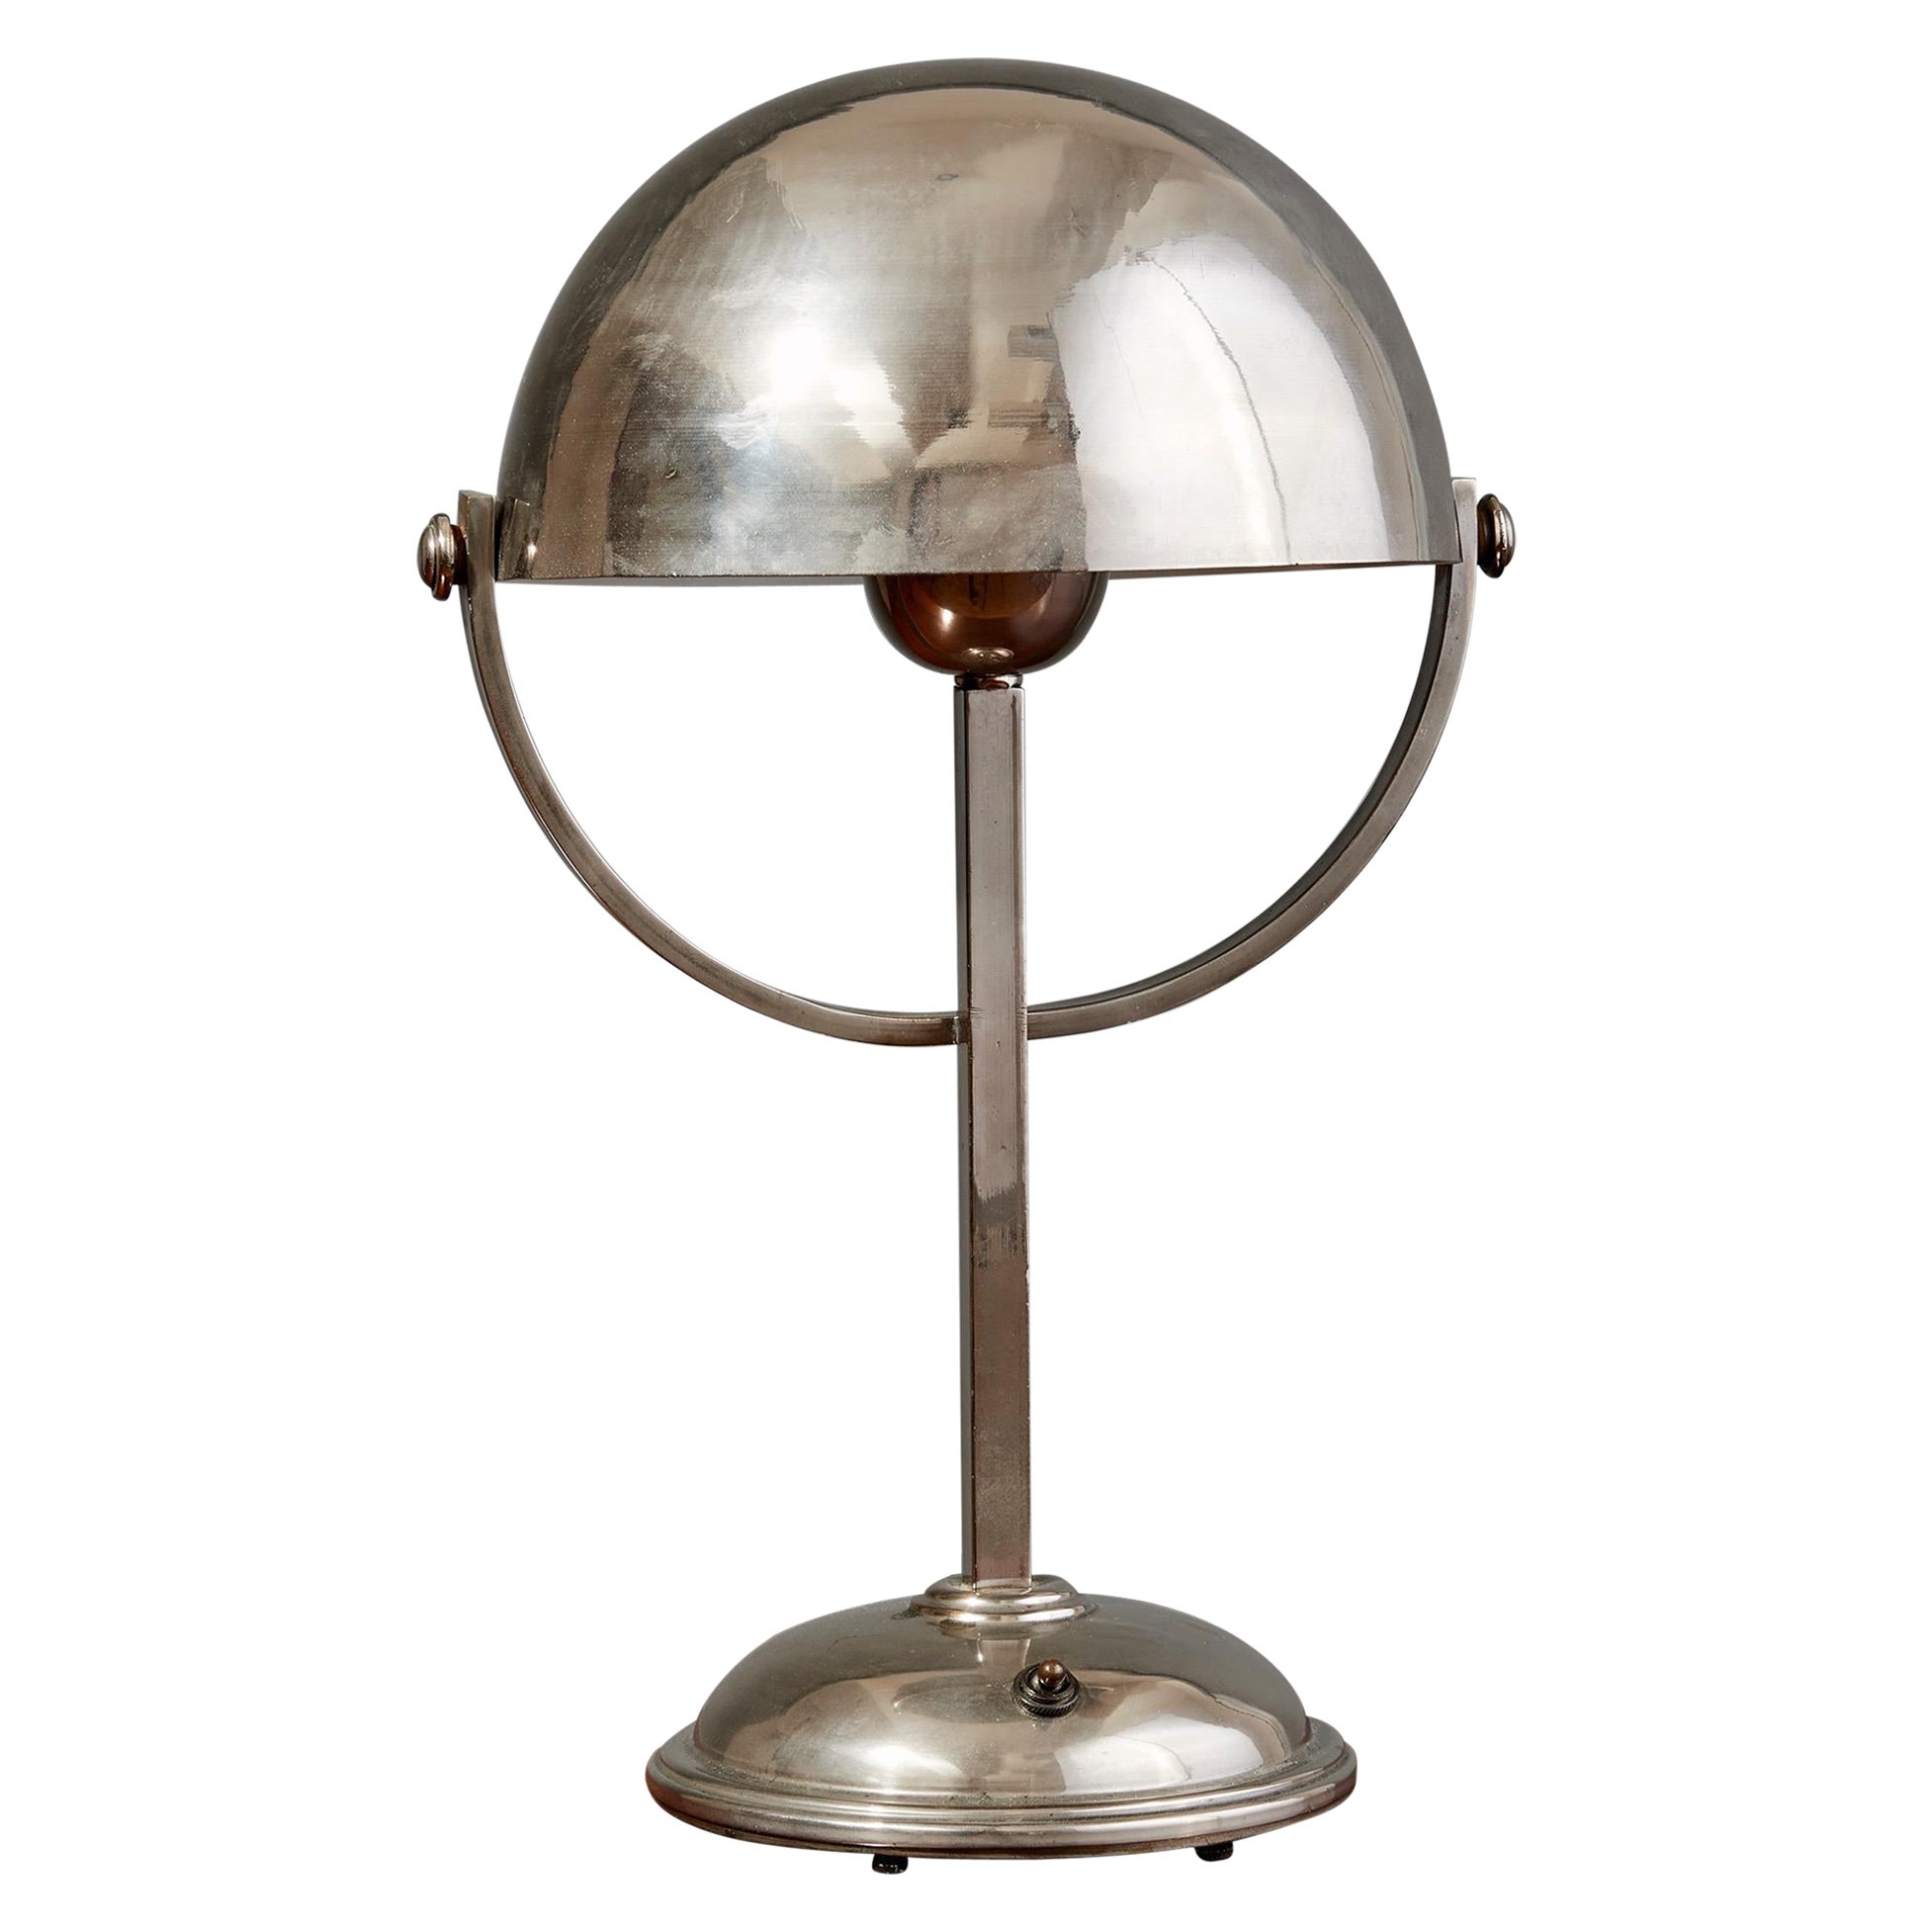 Felix Aublet Style Nickel-Plated Table Lamp with Rounded Shade, France 1930's